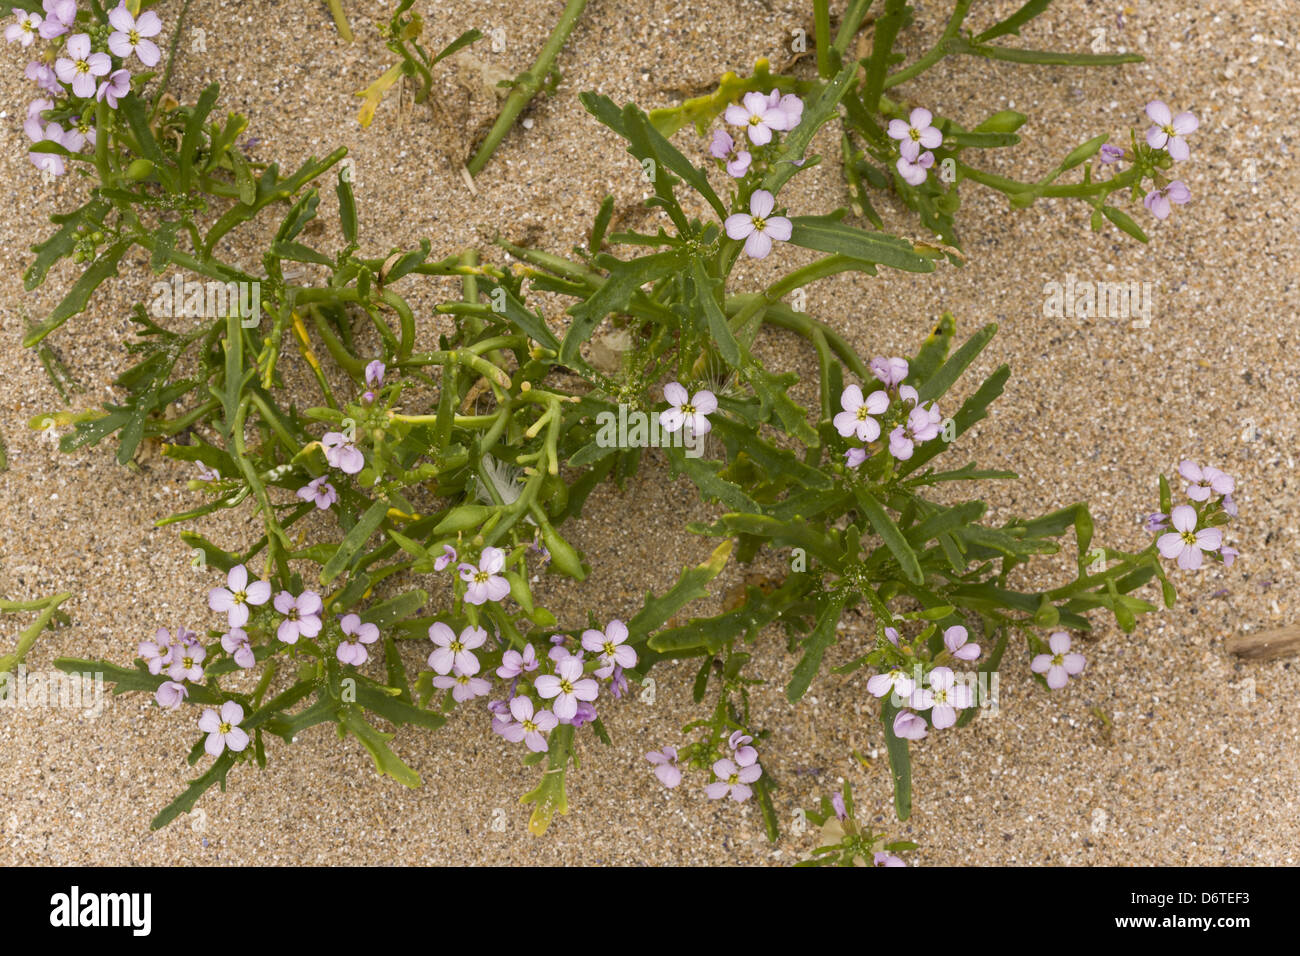 Sea Rocket (Cakile maritima ssp. integrifolia) in flower and fruit, growing on sand dunes, August Stock Photo